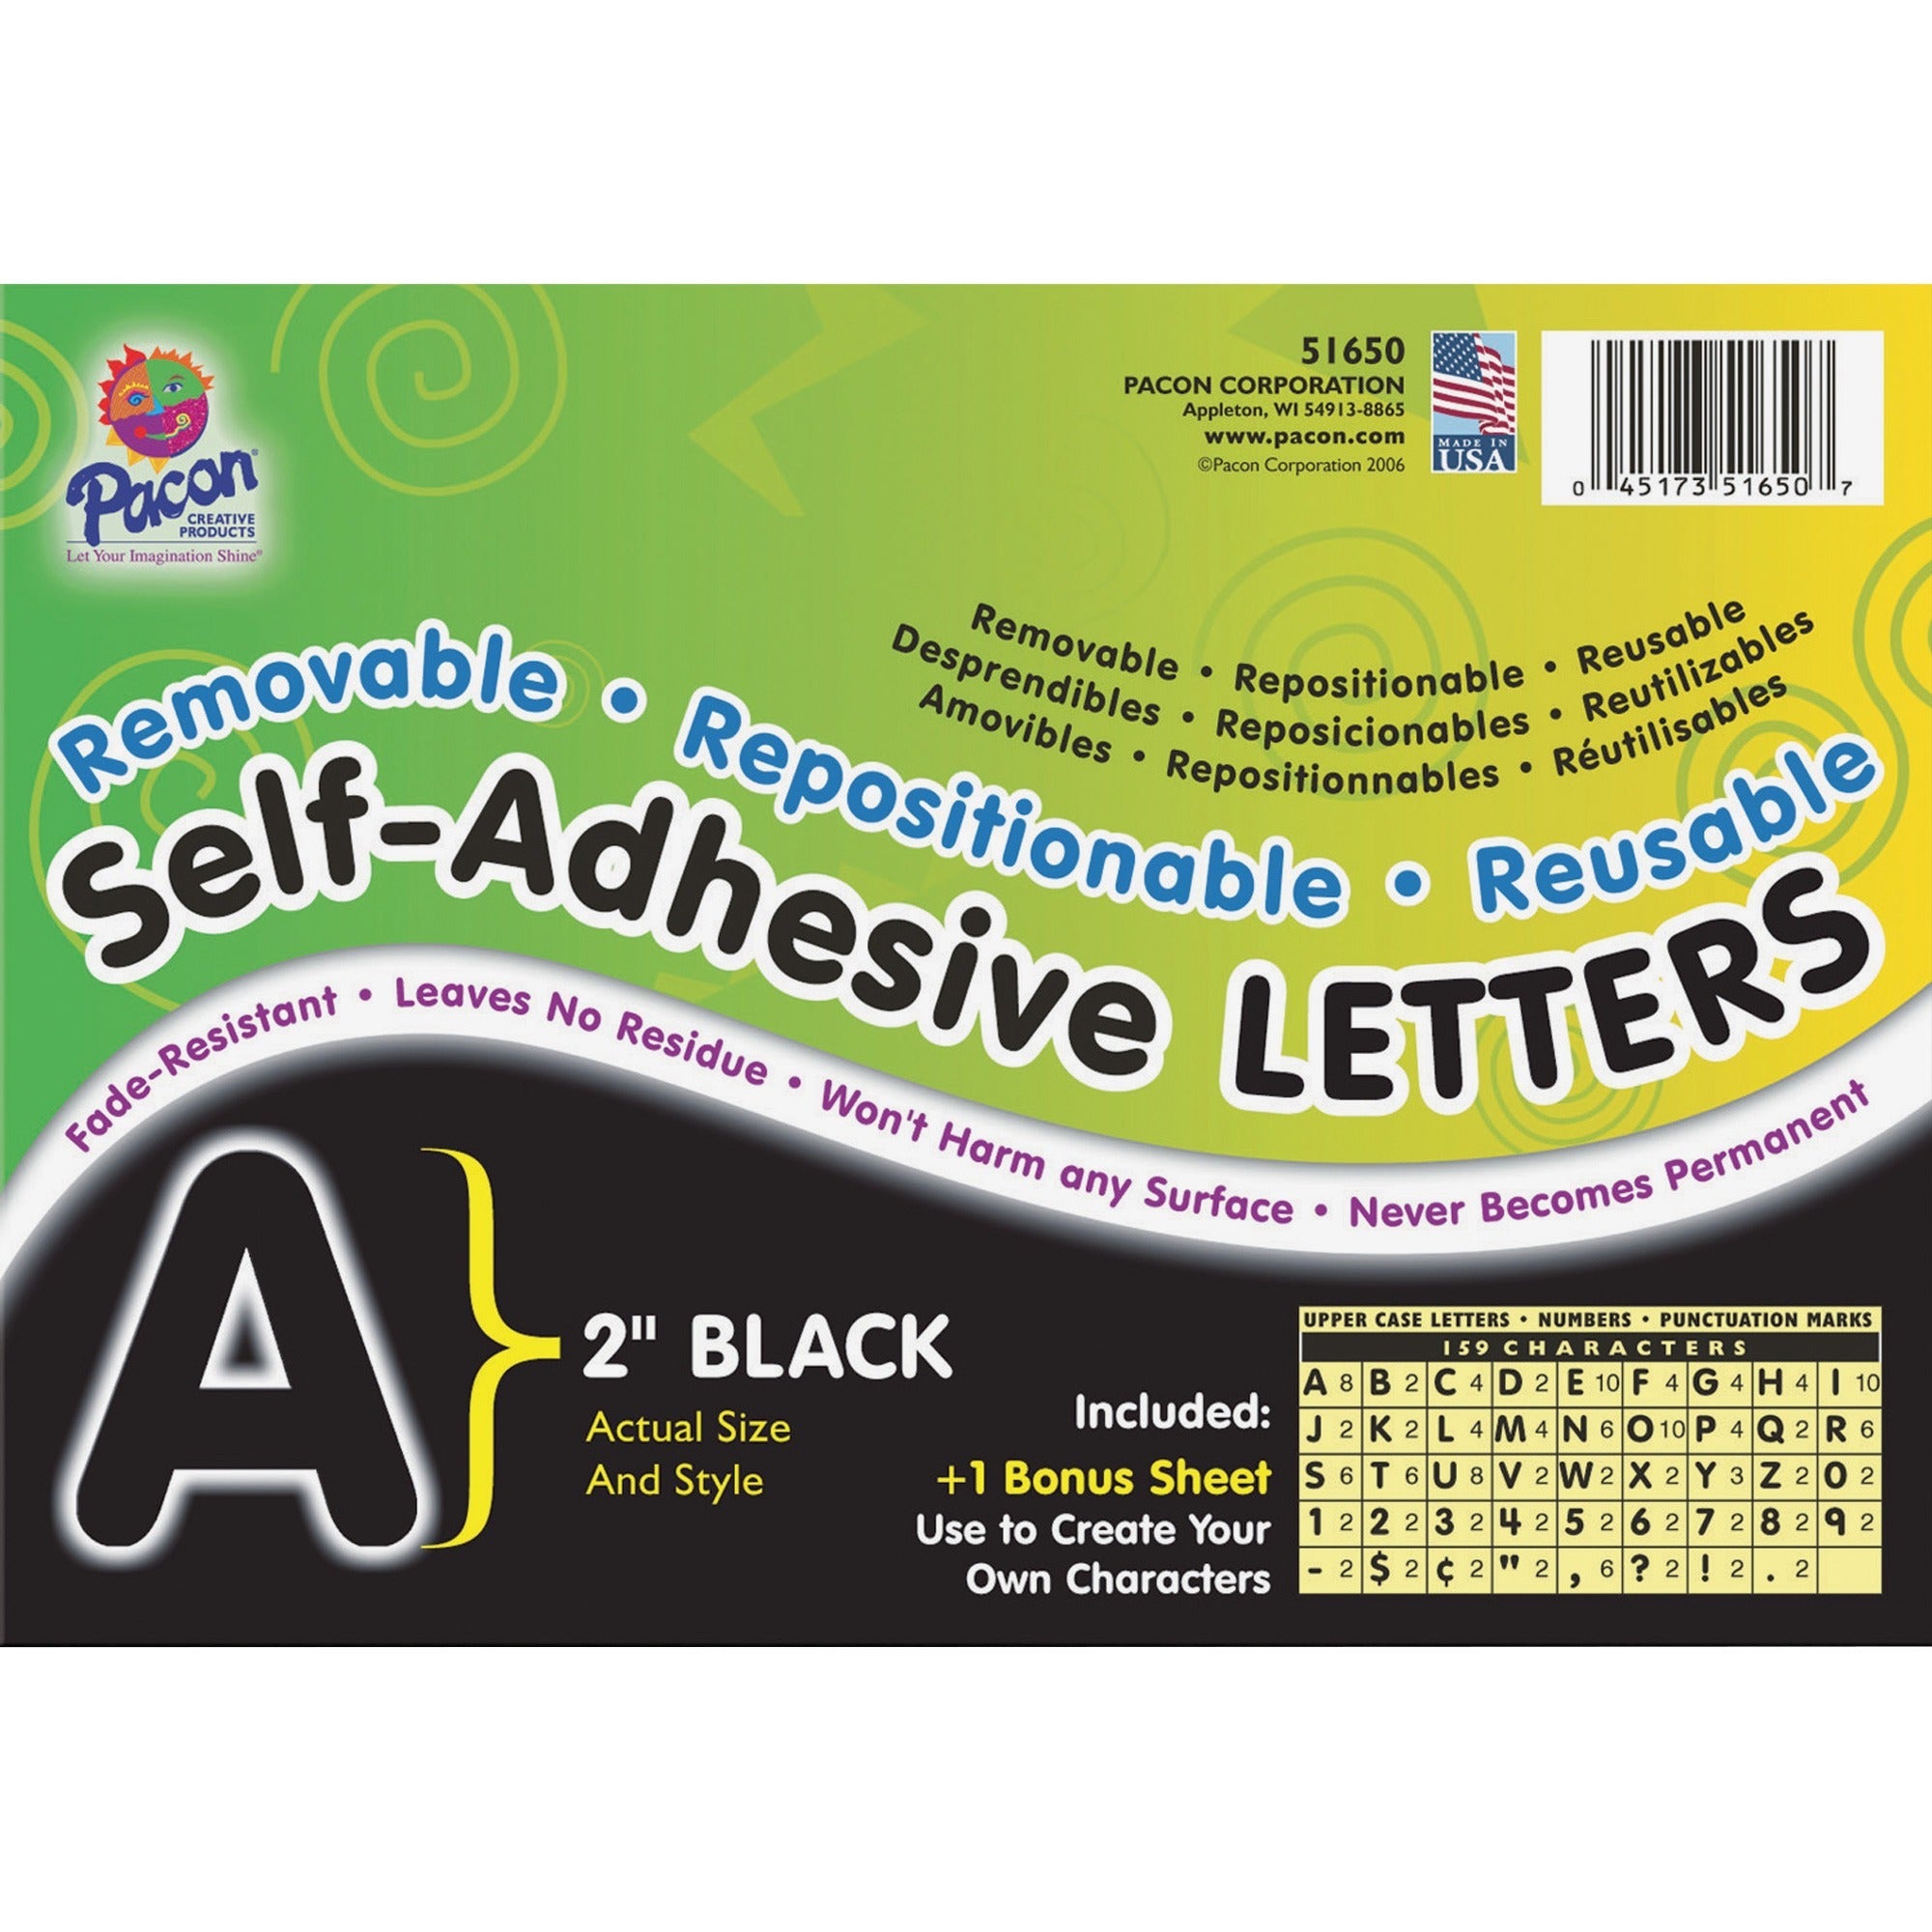 UCreate Reusable Self-Adhesive Letters - (Uppercase Letters, Number, Punctuation Marks) Shape - Self-adhesive - Acid-free, Fadeless - 2" Length - Puffy Font - Black - 159 / Pack - 